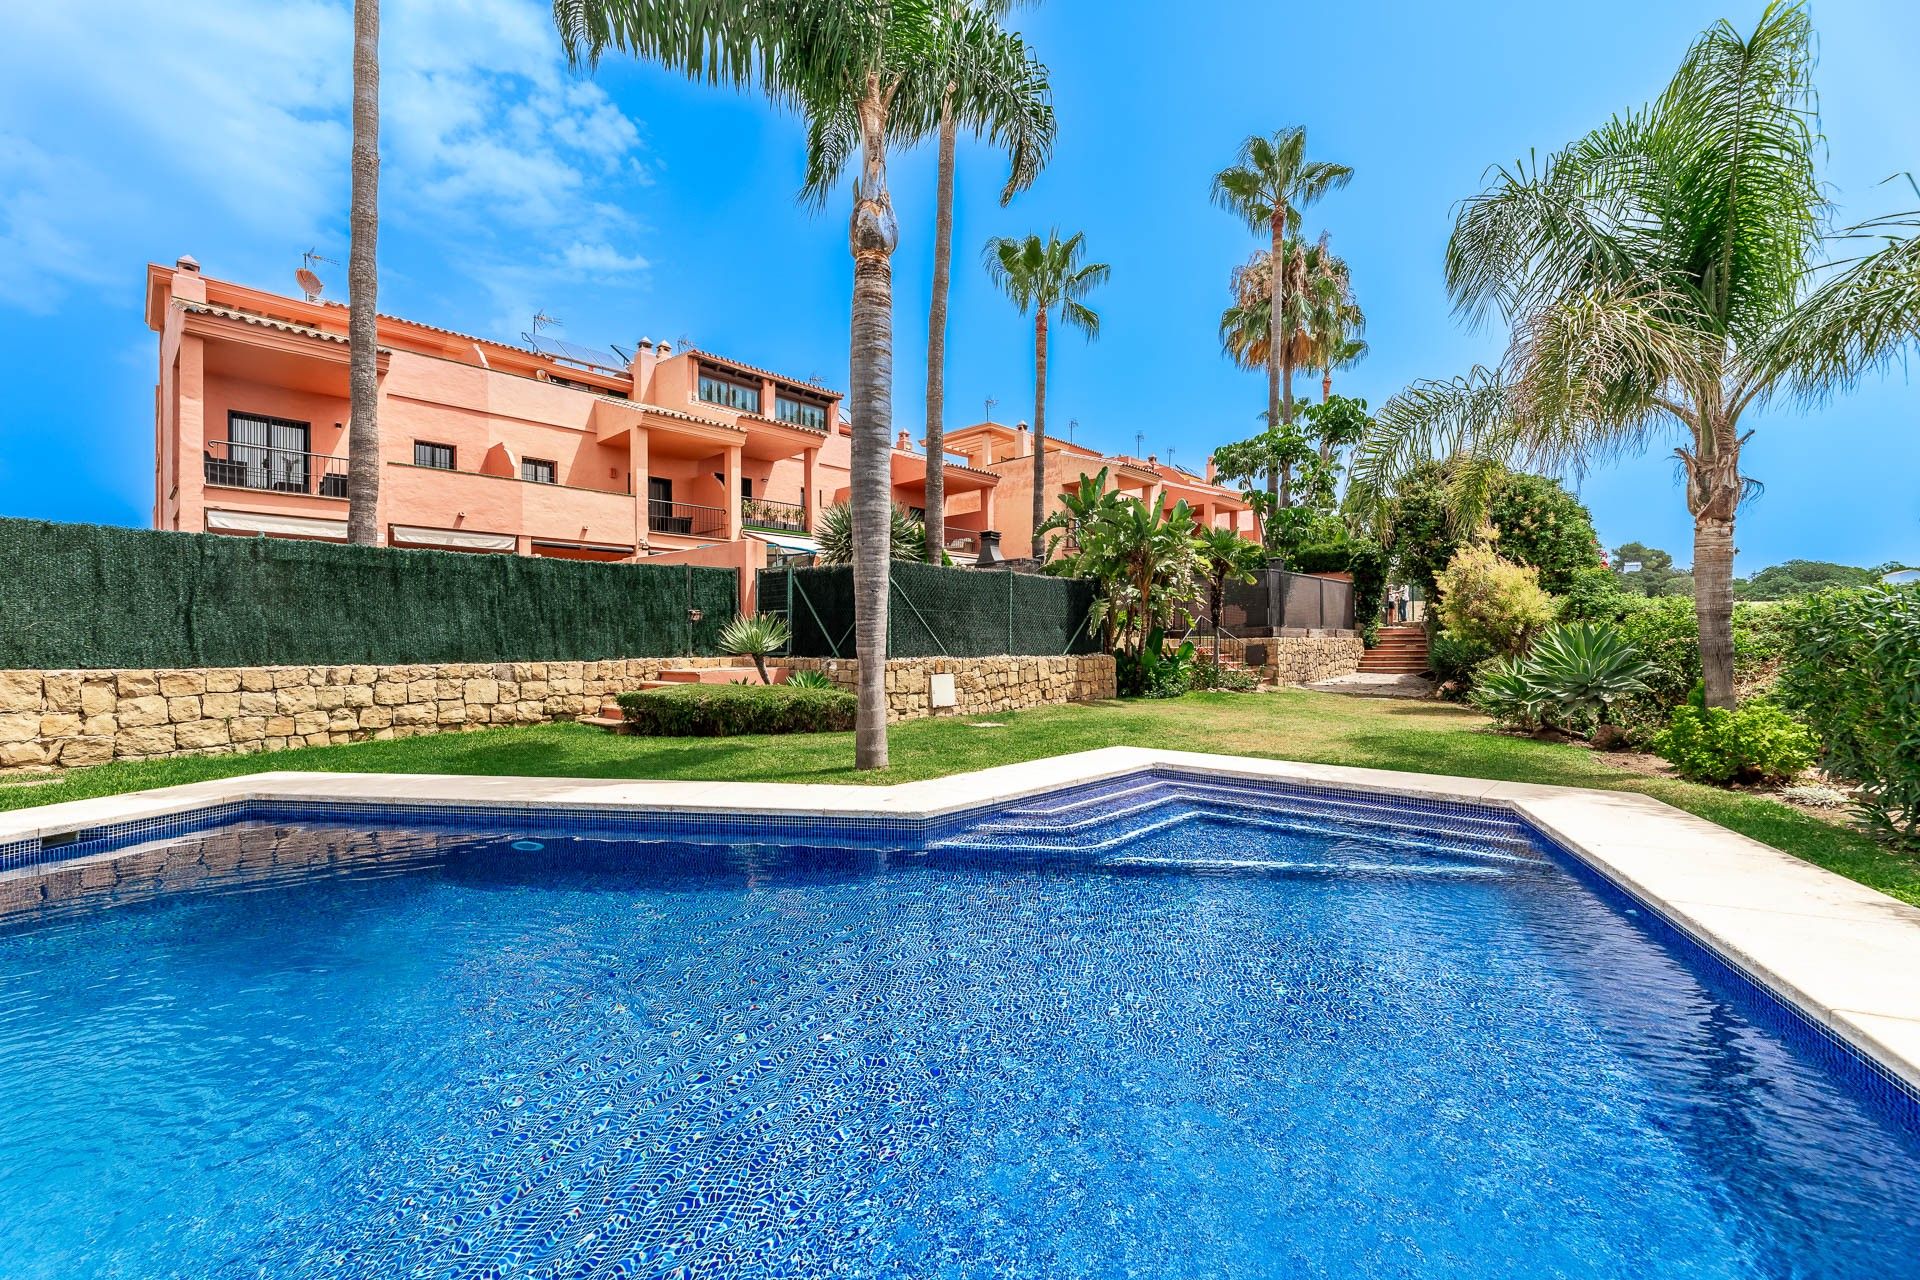 Large Townhouse close to all amenities | Engel & Völkers Marbella